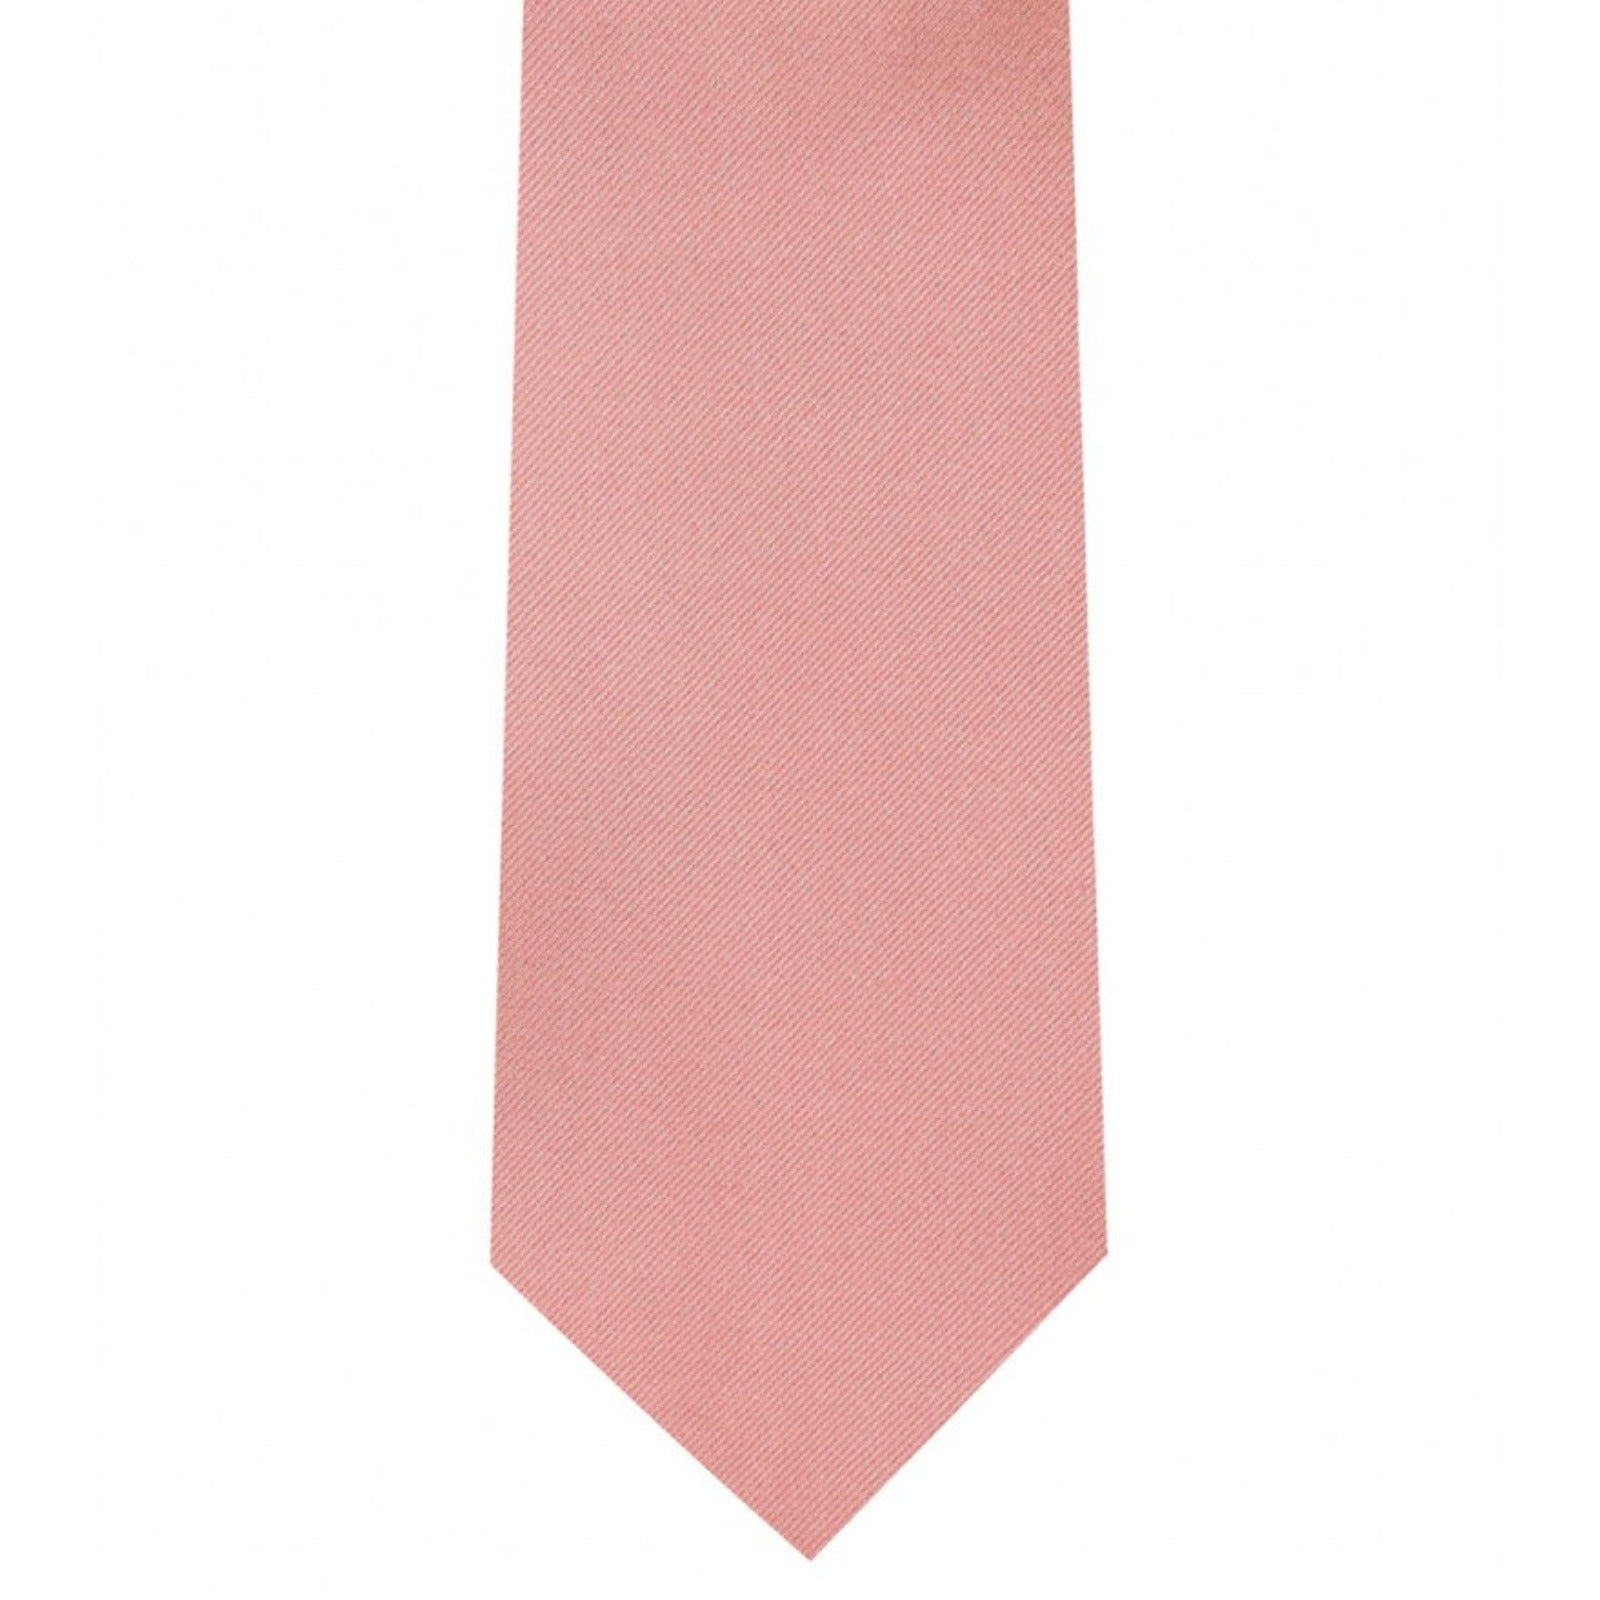 Classic Dusty Rose Tie Ultra Skinny tie width 2.25 inches With Matching Pocket Square | KCT Menswear